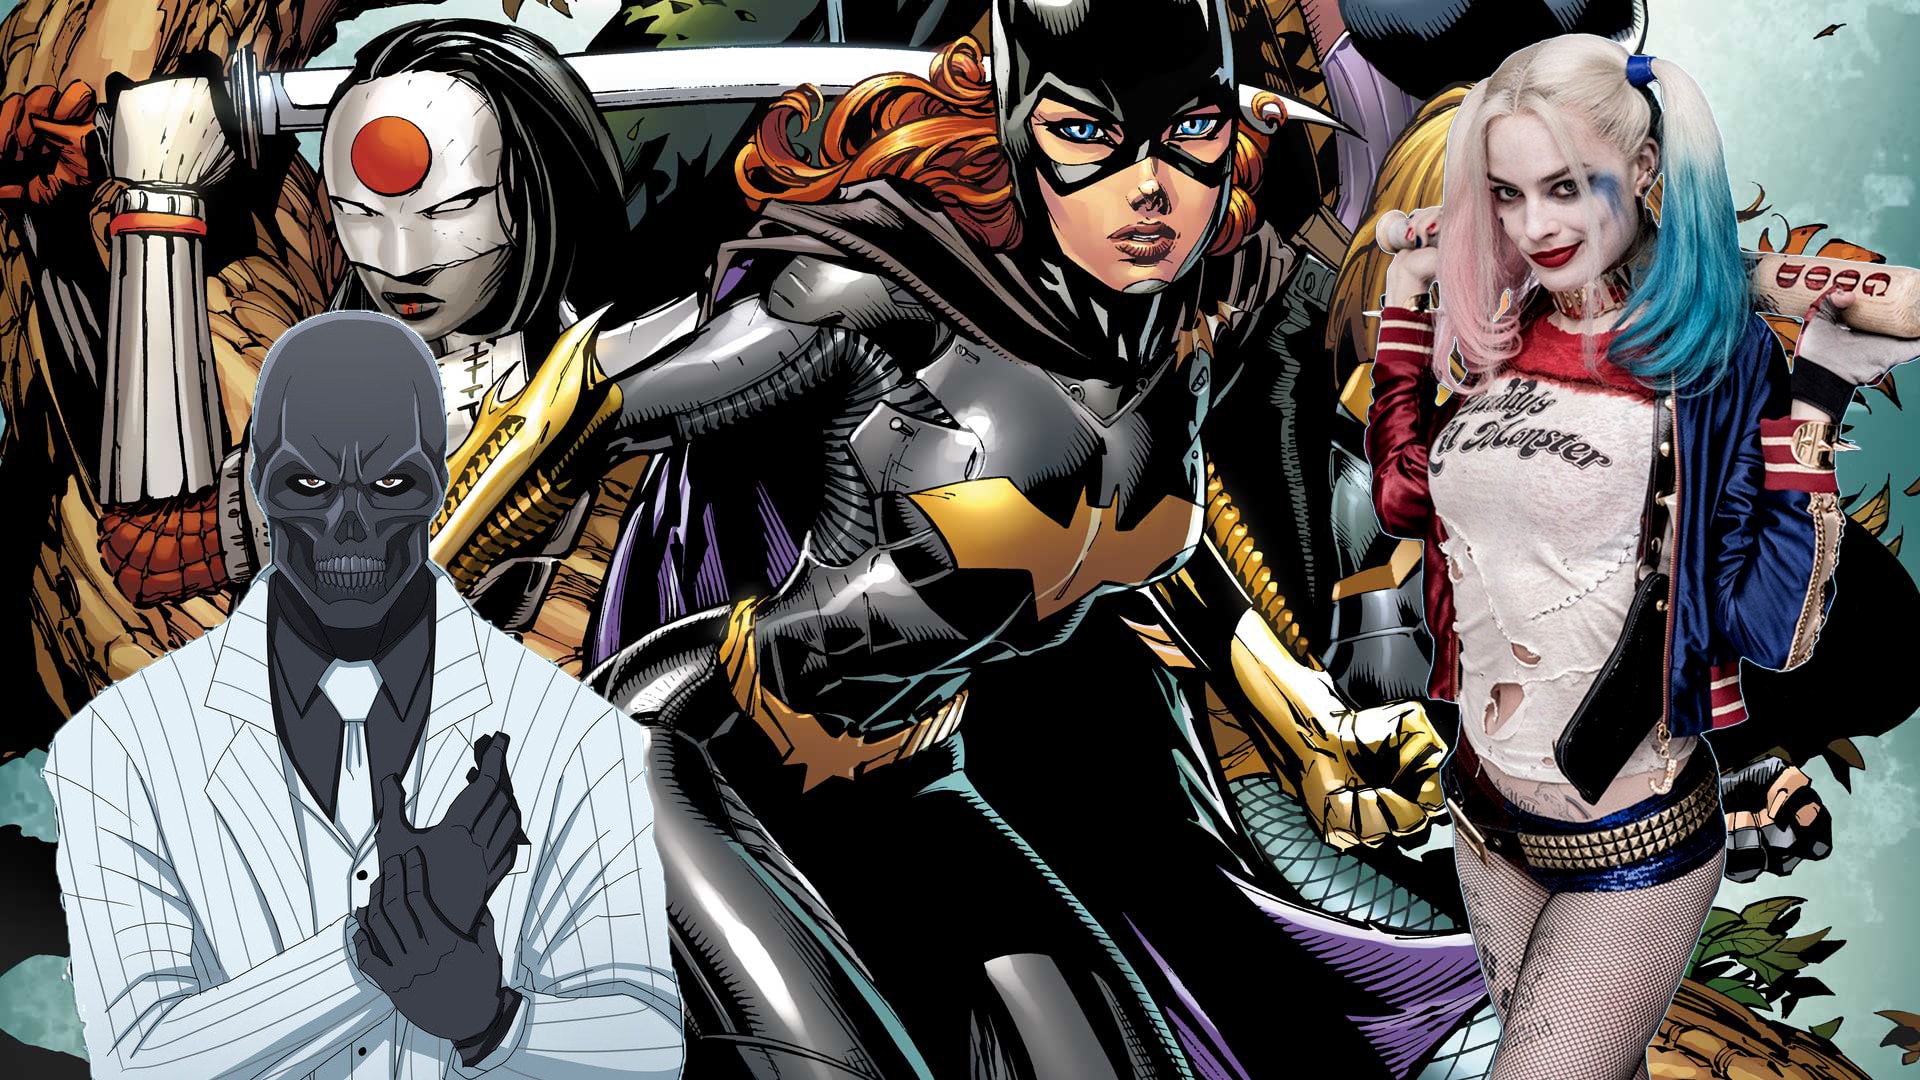 Black Mask To Be The Villain In DC’s Birds Of Prey?